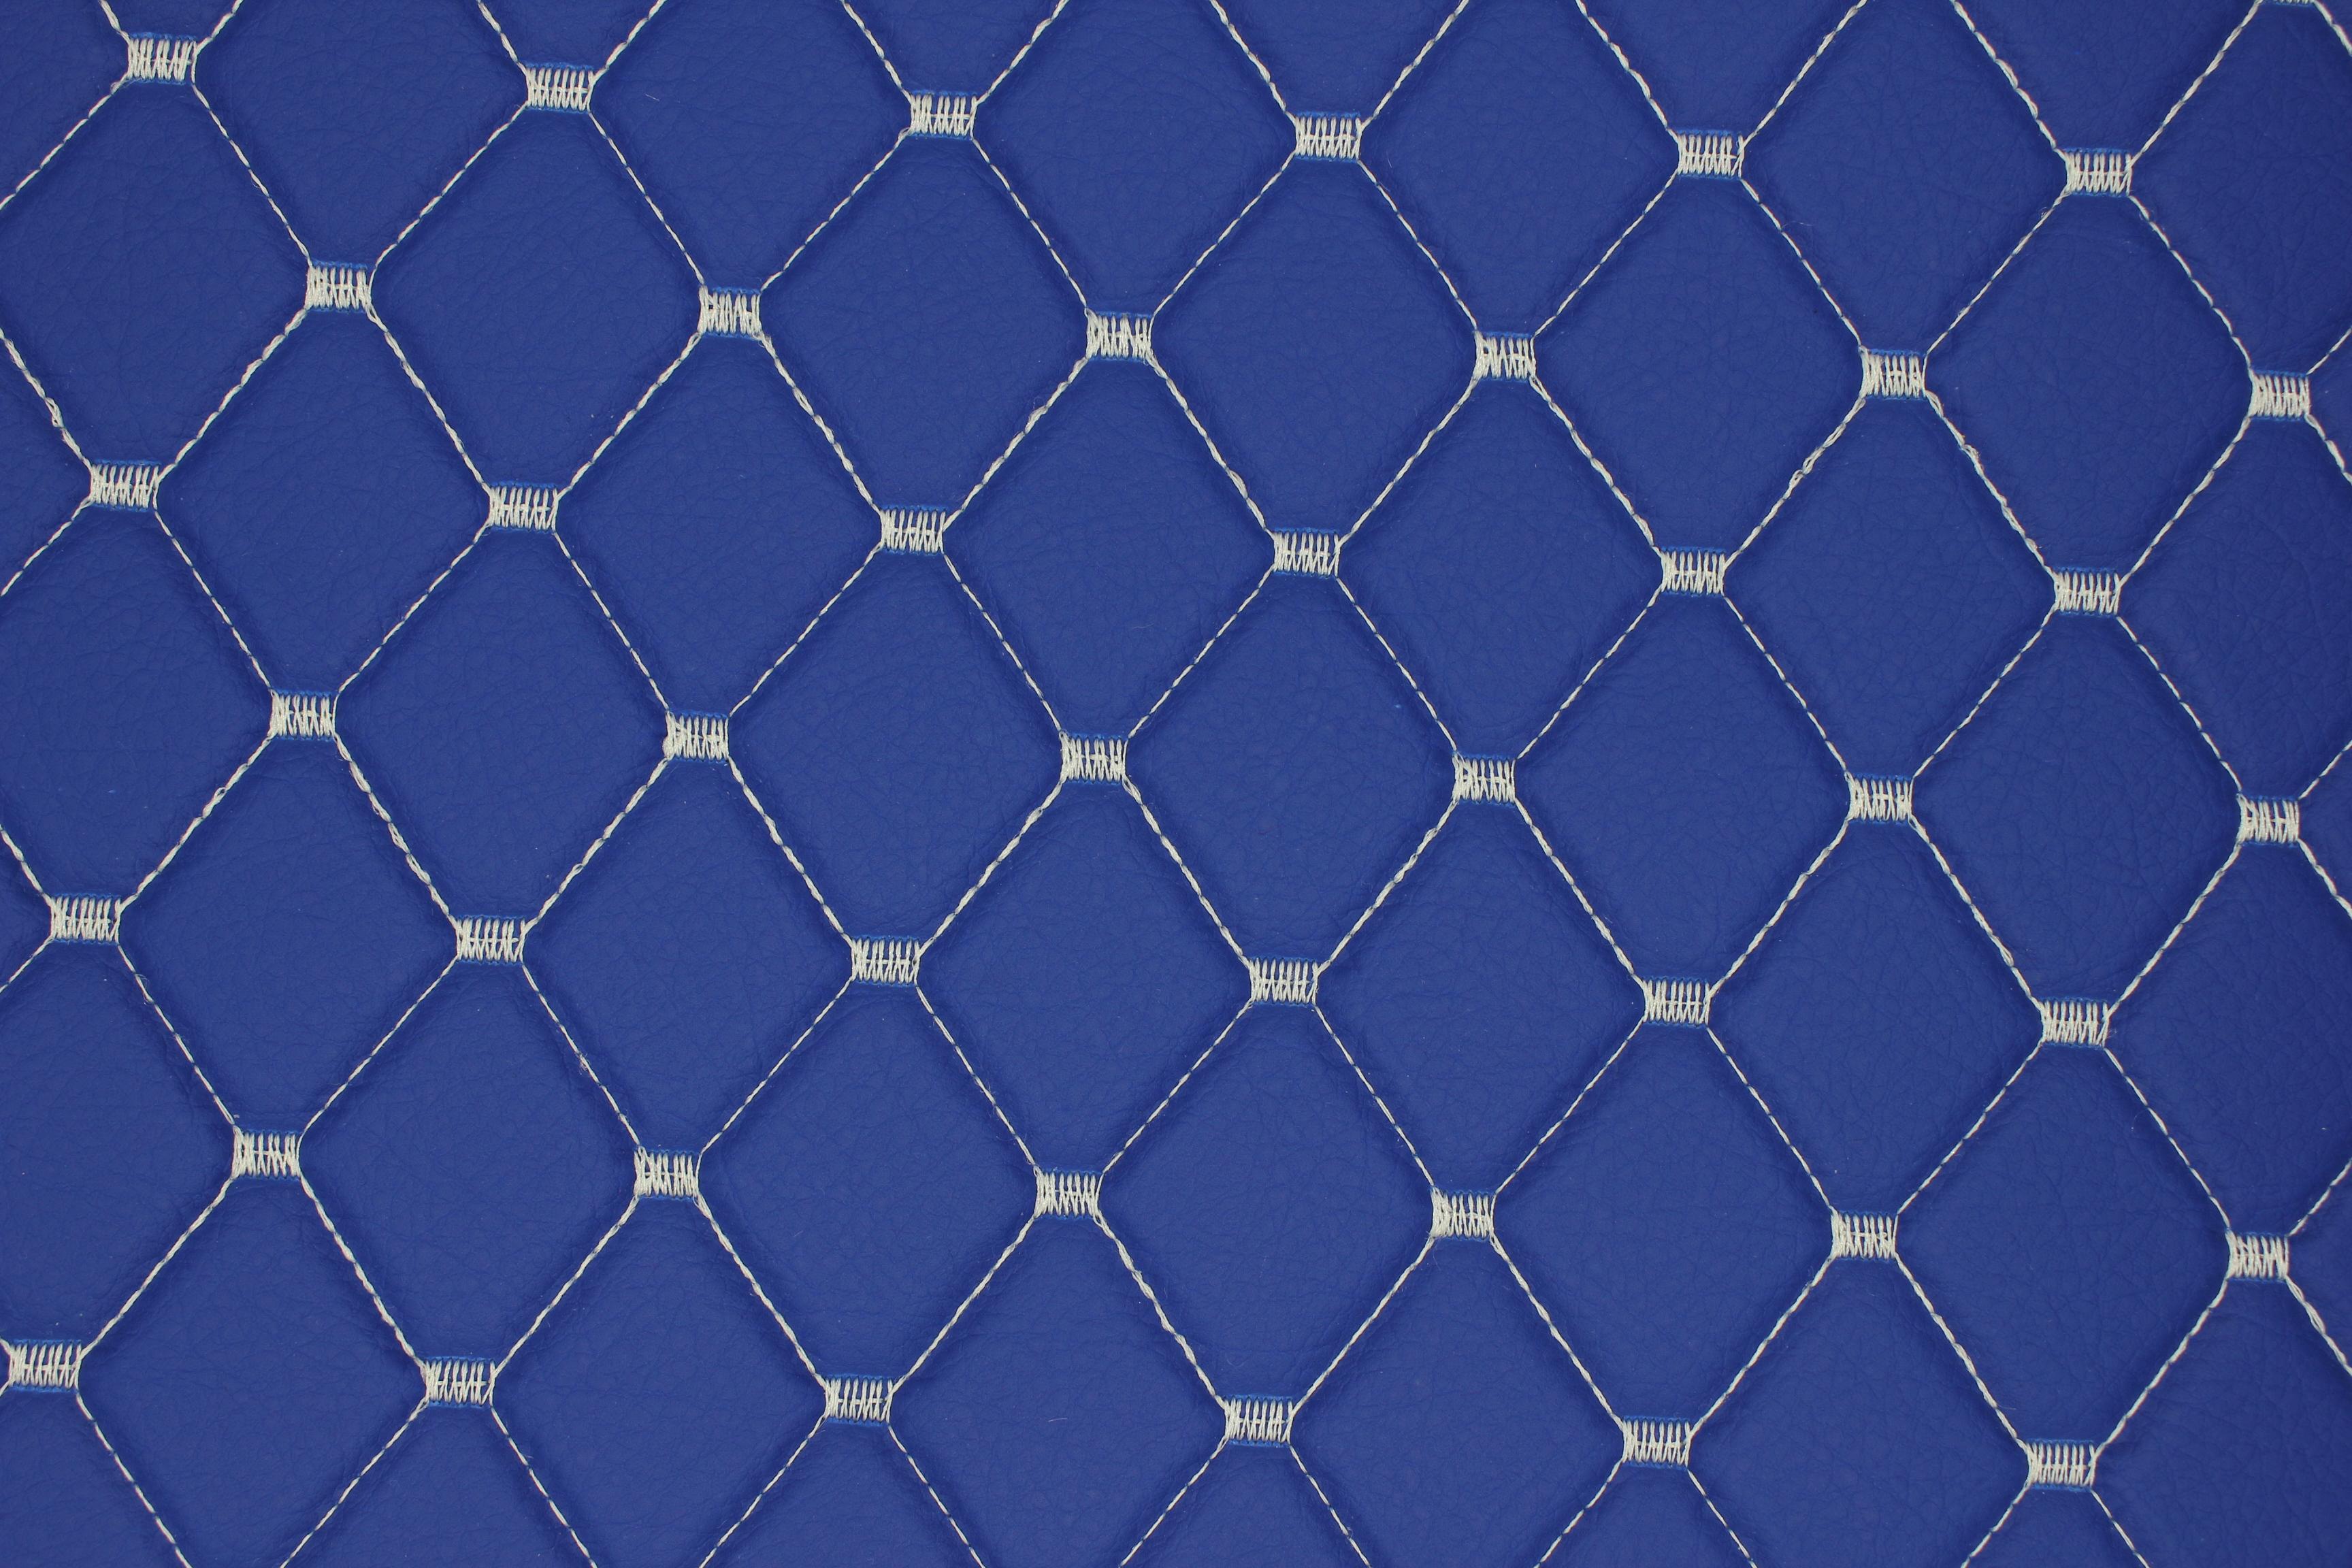 White Quilted Blue Vinyl Faux Leather Car Upholstery Fabric | 2"x2" 5x5cm Diamond Stitch with 5mm Foam | 140cm Wide | Automotive Projects